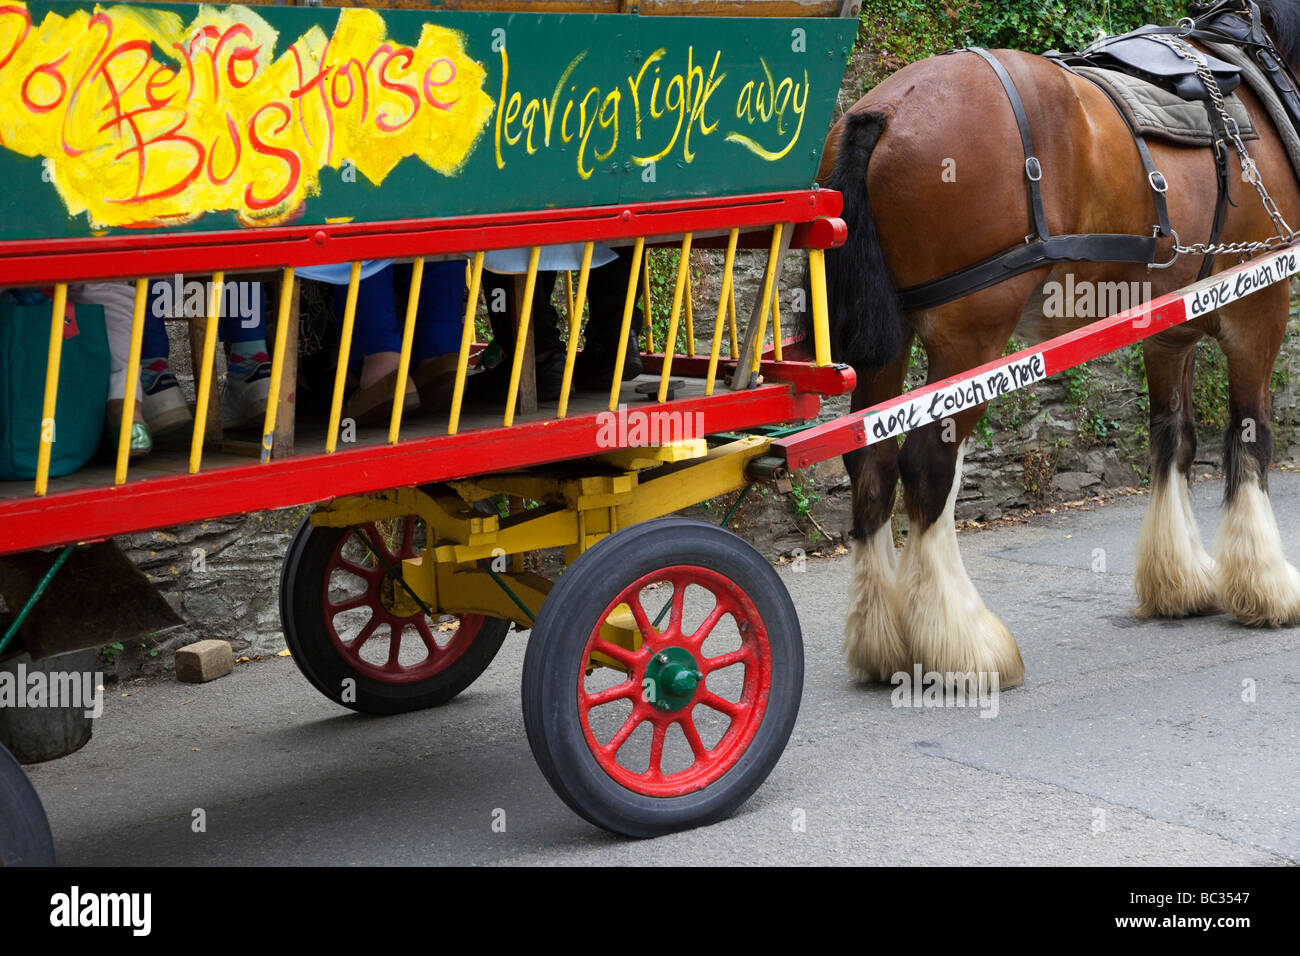 Decorated Village farm cart & heavy Horse-bus services; Village tourist public transport in Polperro, Cornwall, South-east England, UK Stock Photo